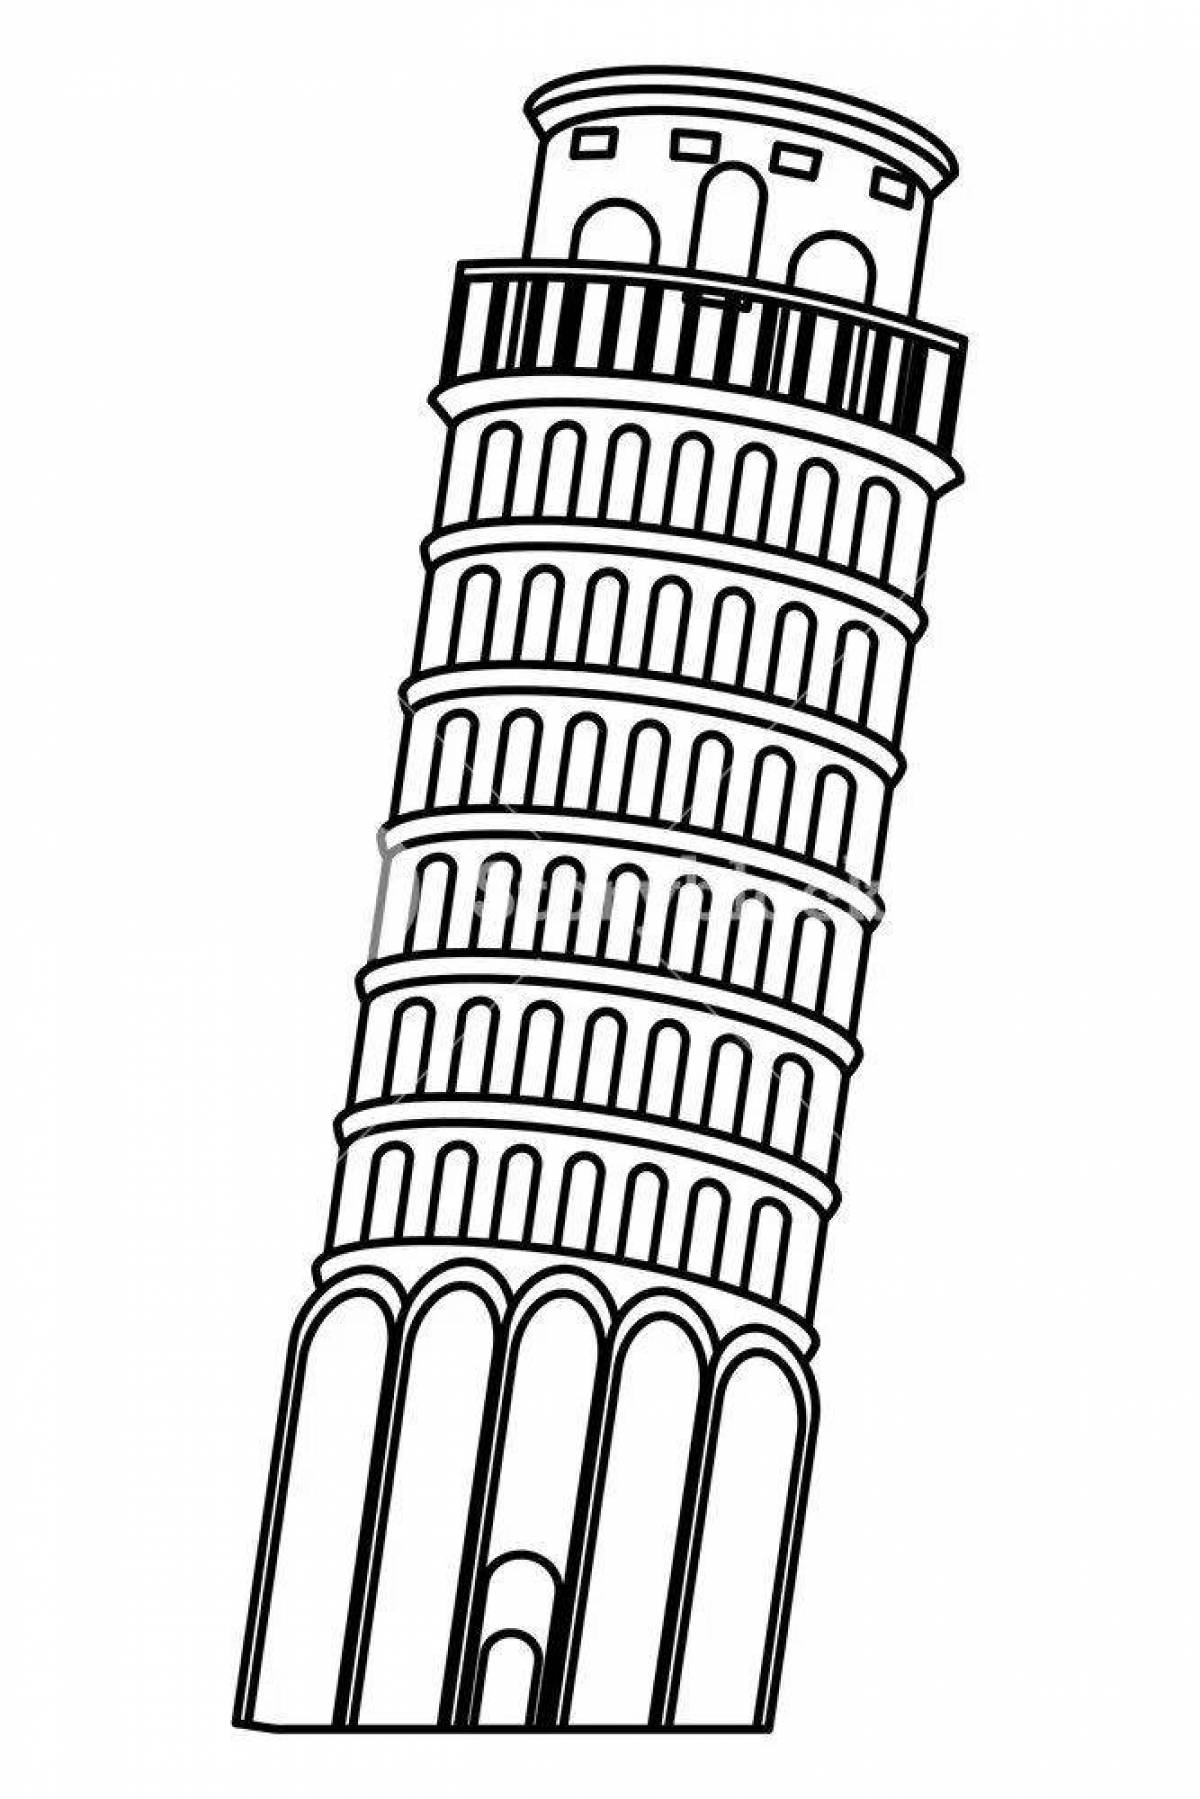 Adorable Leaning Tower of Pisa coloring book